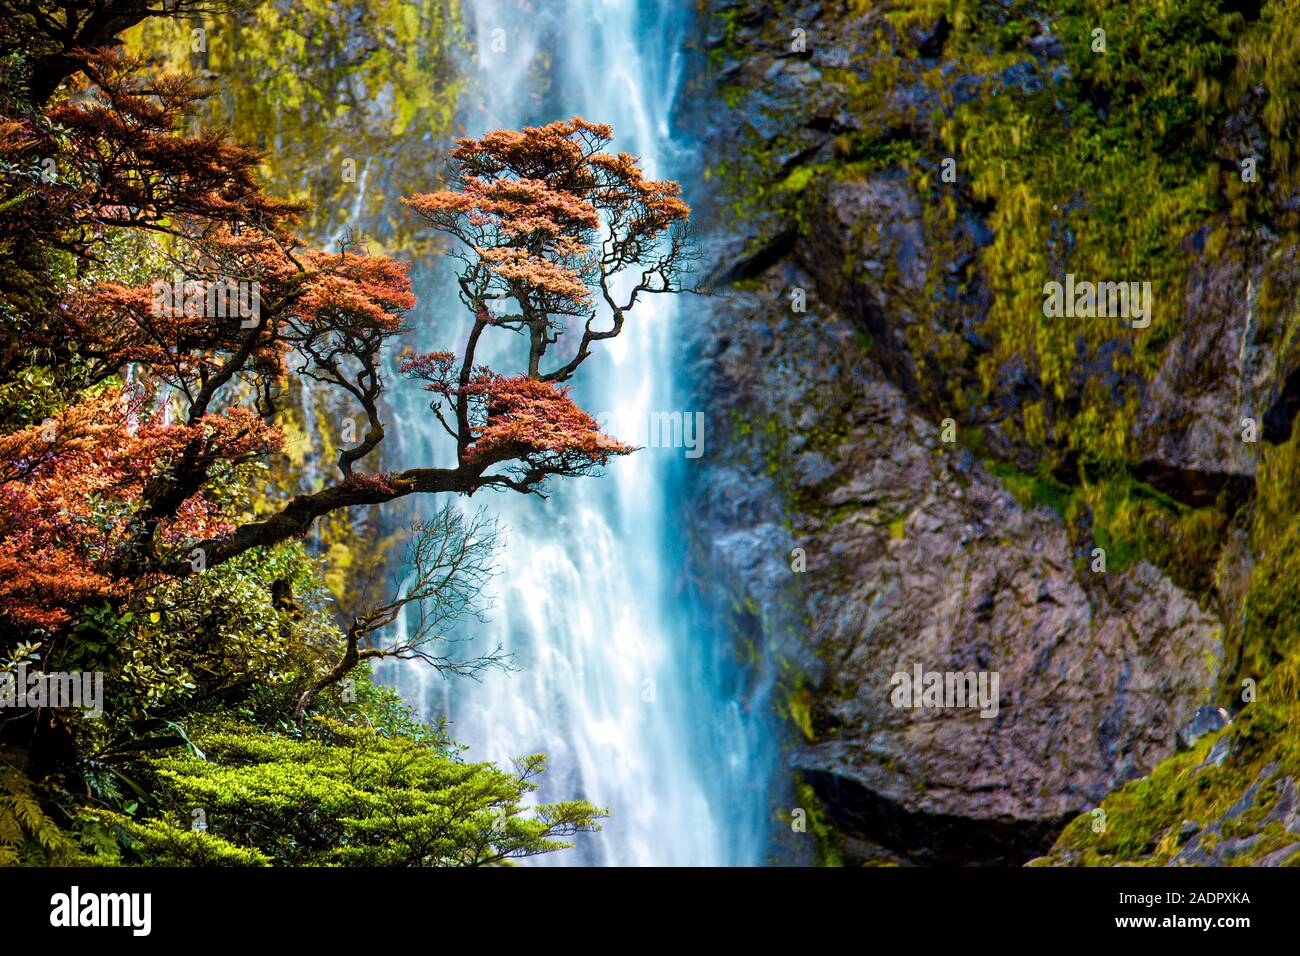 Devil's Punchbowl Waterfall in Arthur's Pass, New Zealand Stock Photo